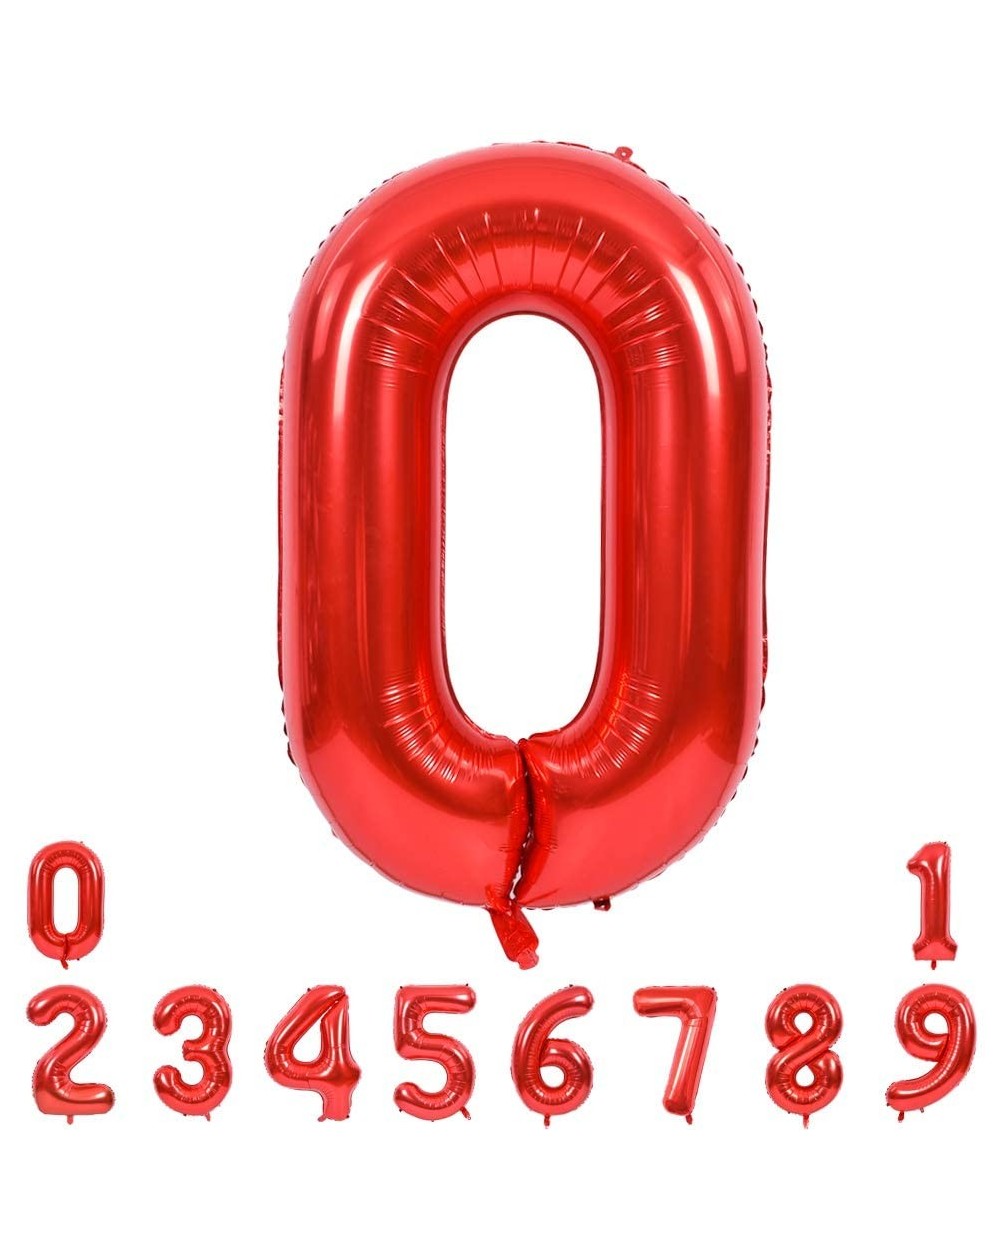 Balloons 40 Inch Red Large Numbers Balloons 0-9- Number 0 Digit 0 Helium Balloons- Foil Mylar Big Number Balloons for Birthda...